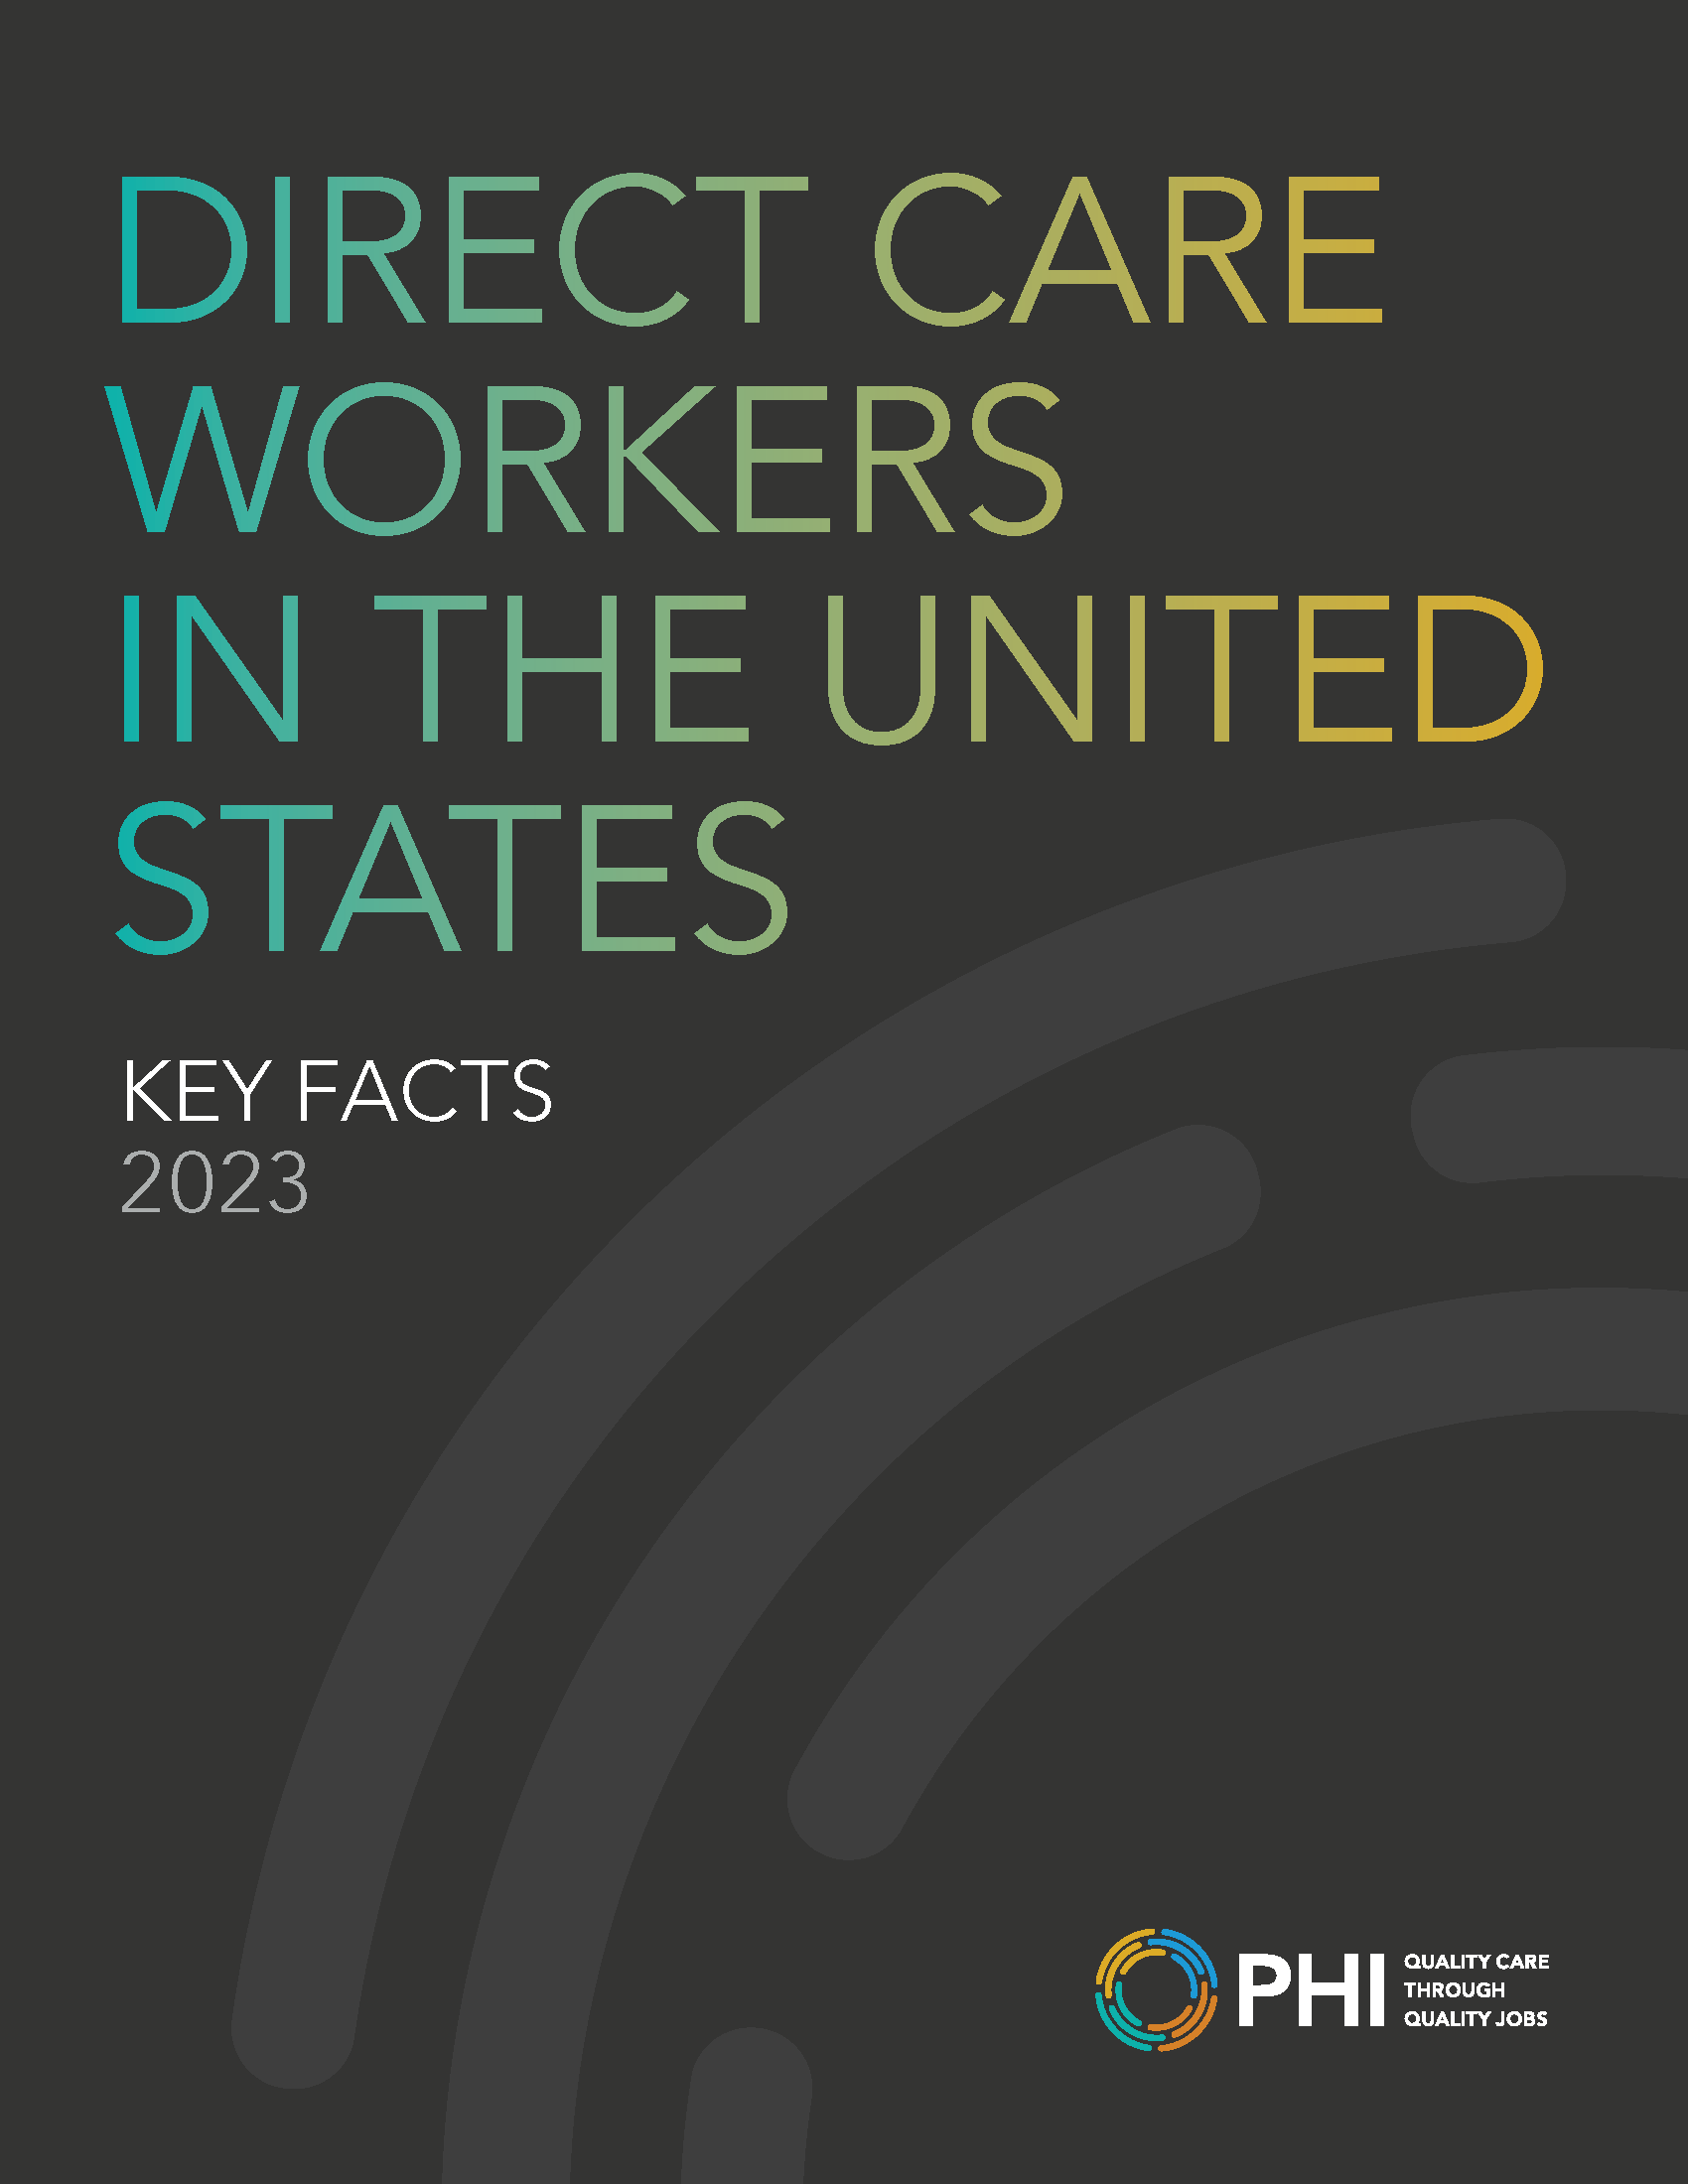 Direct Care Workers in the United States: Key Facts 2023